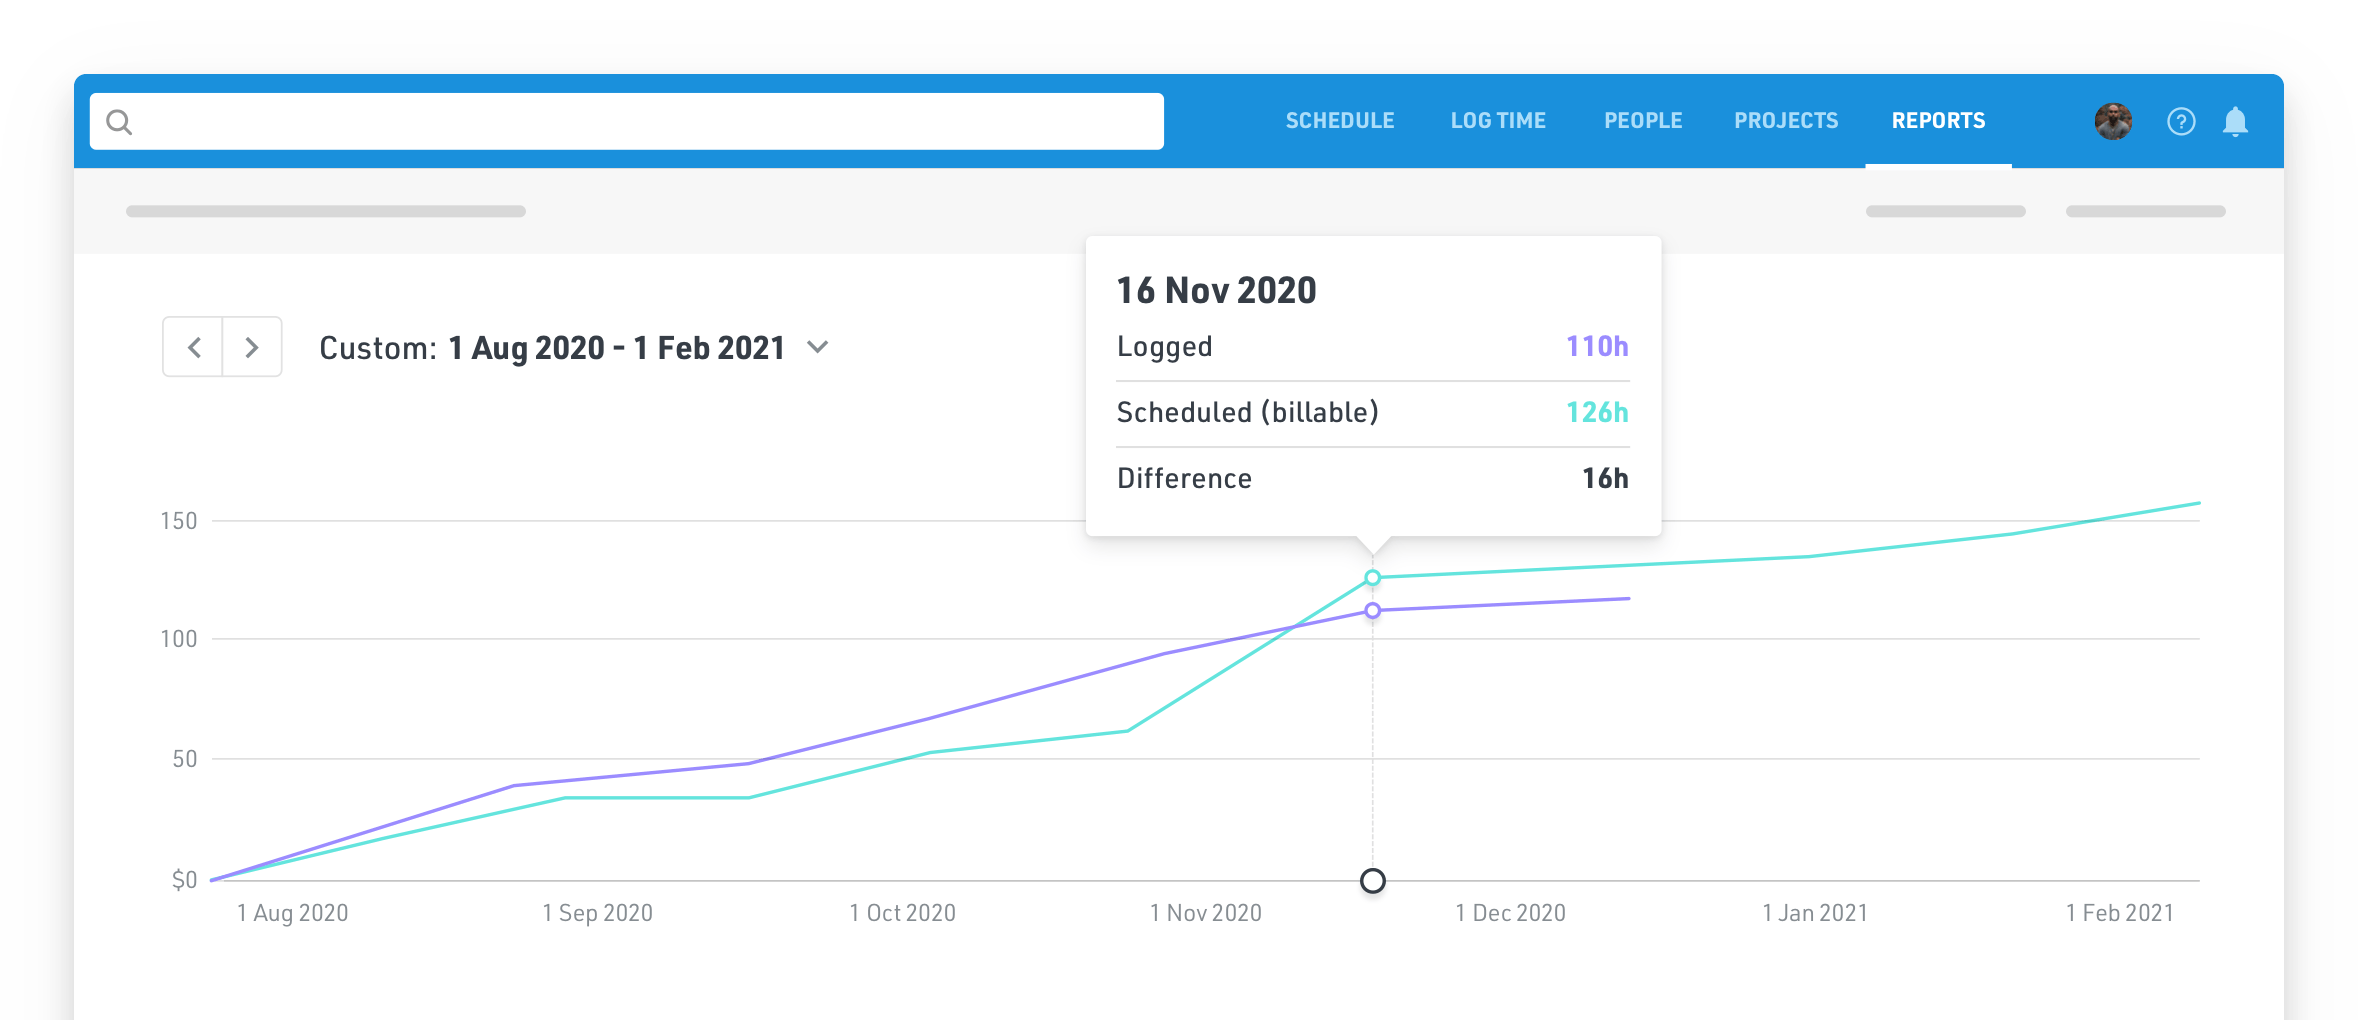 Project reporting to compare your scheduled vs actual hours